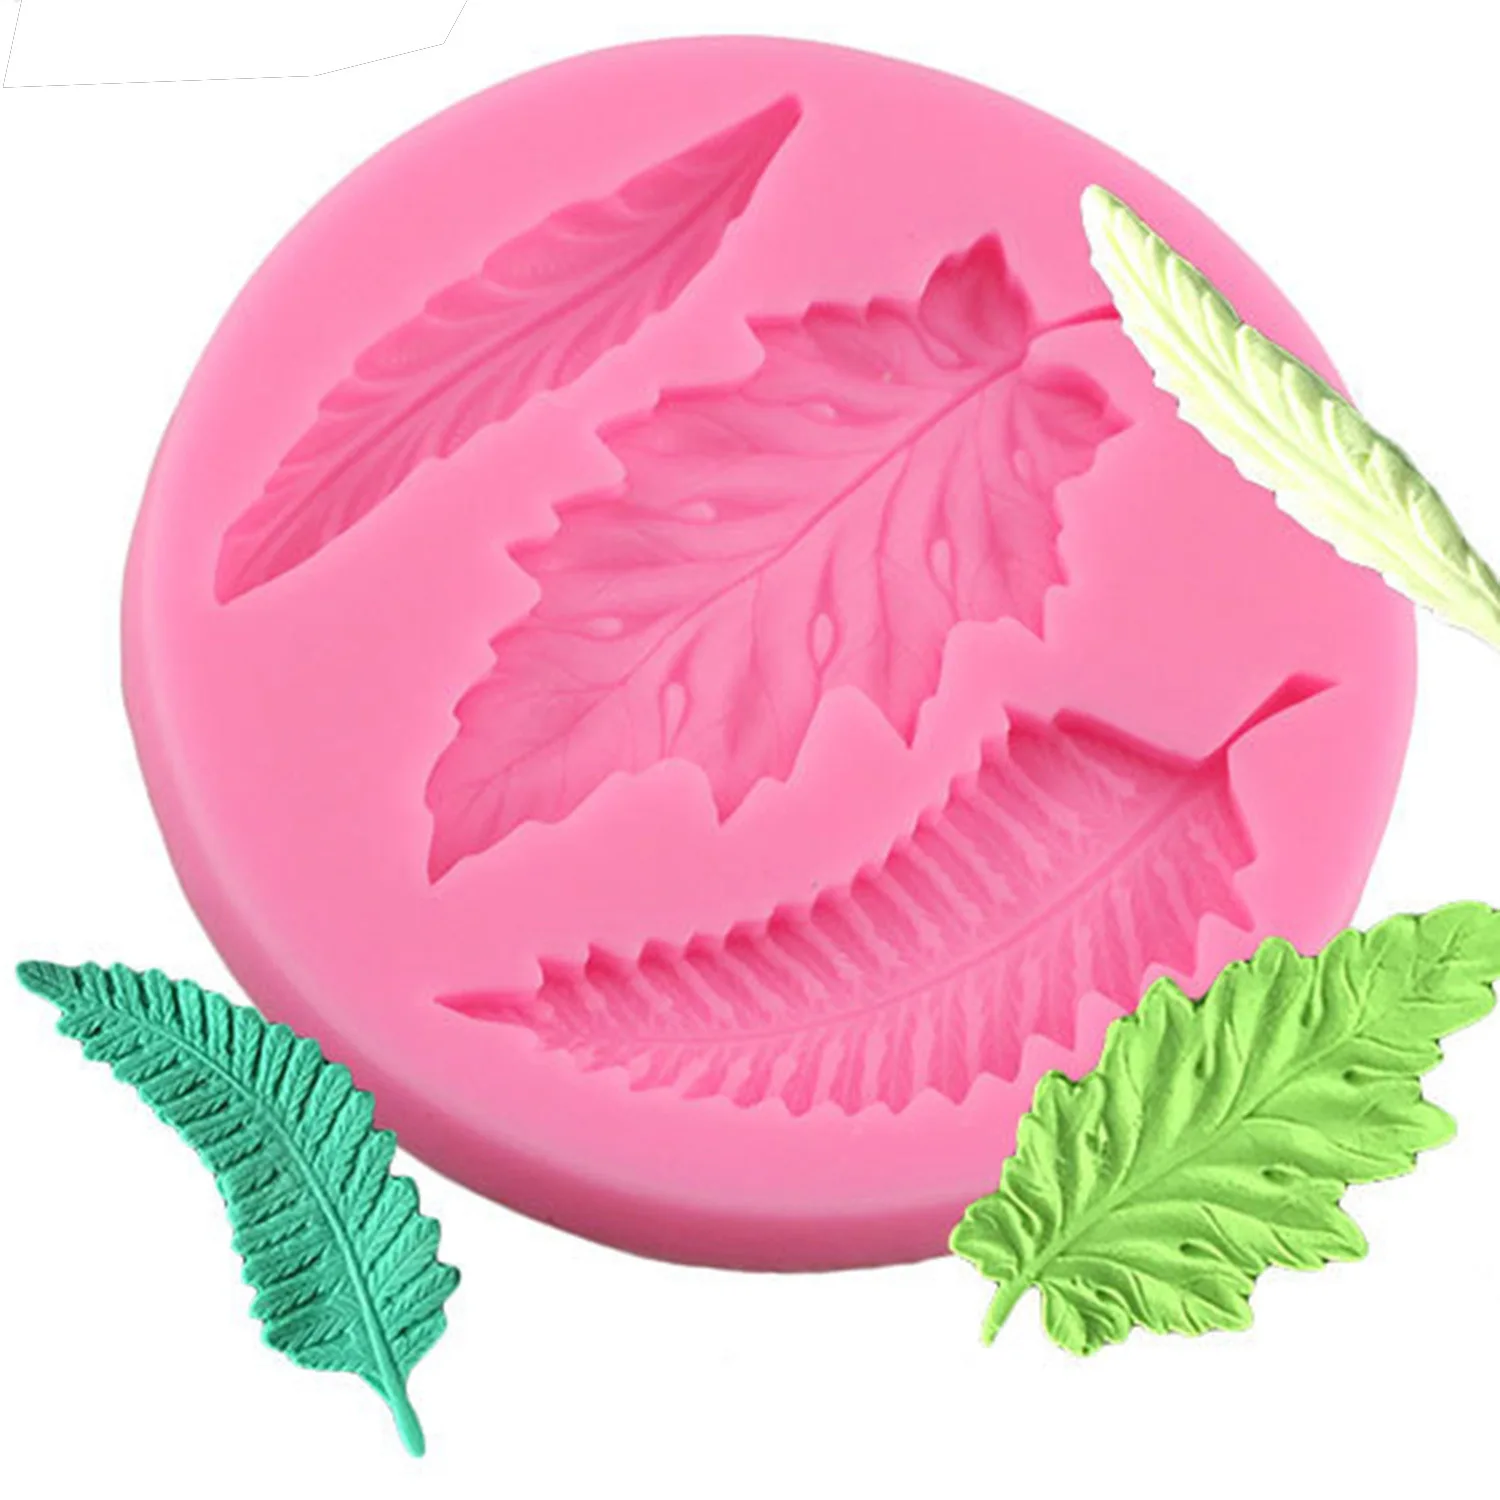 

2pcs/lot Leaf Silicone Molds Biscuit Cake Baking Fondant Cake Decoration Tools Chocolate Molds DIY Bakery Accessories